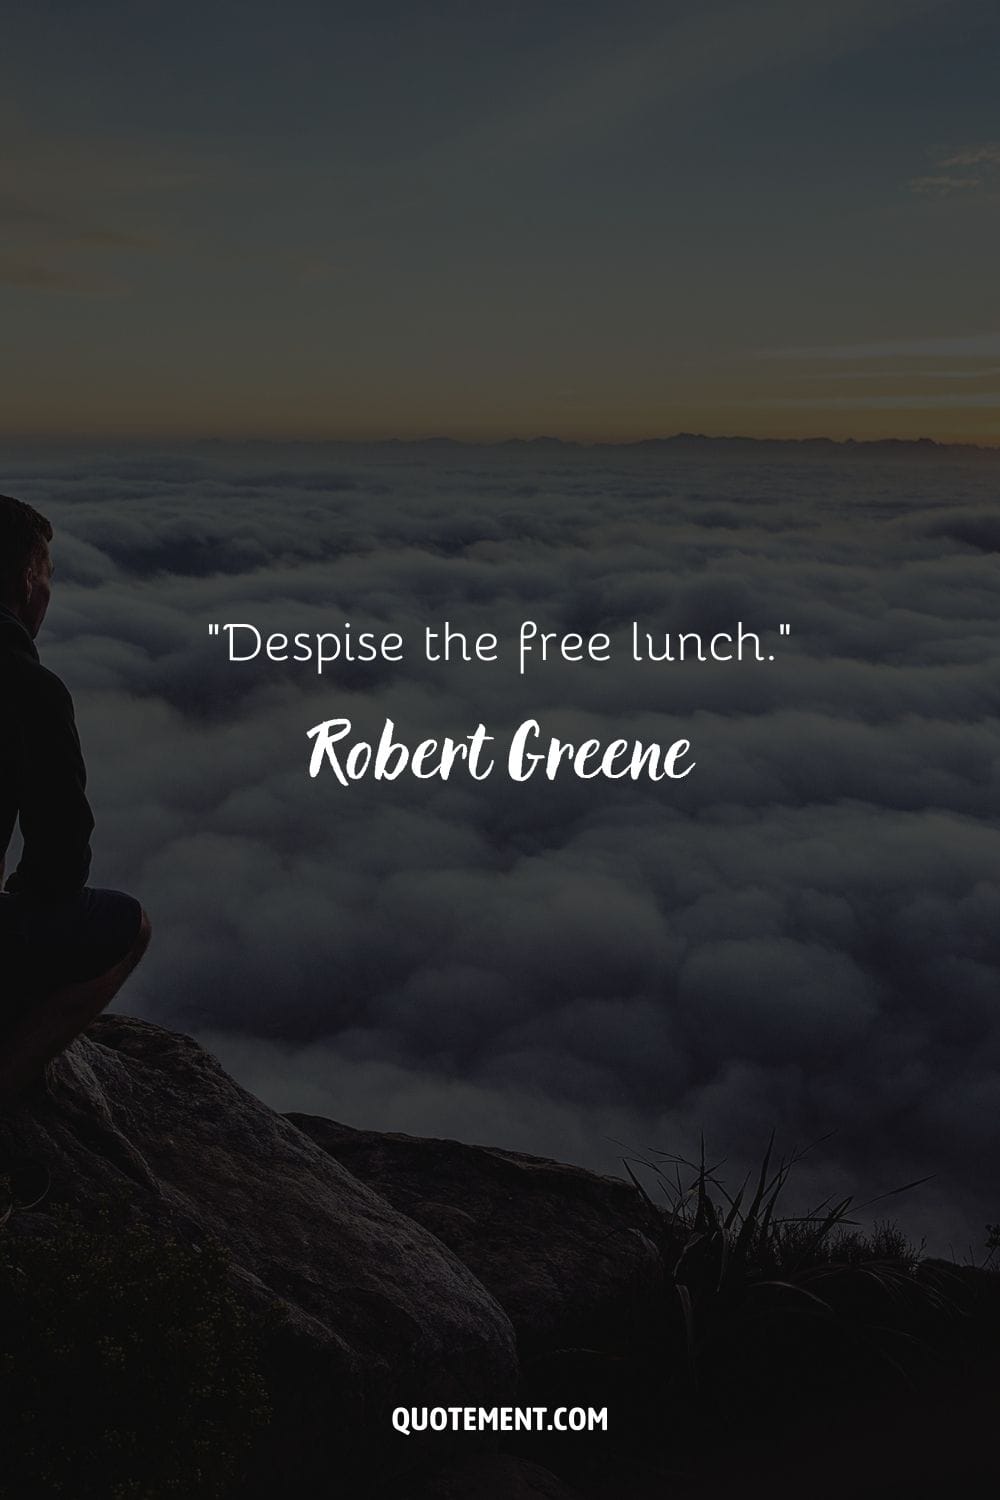 “Despise the free lunch.” ― Robert Greene, The 48 Laws of Power